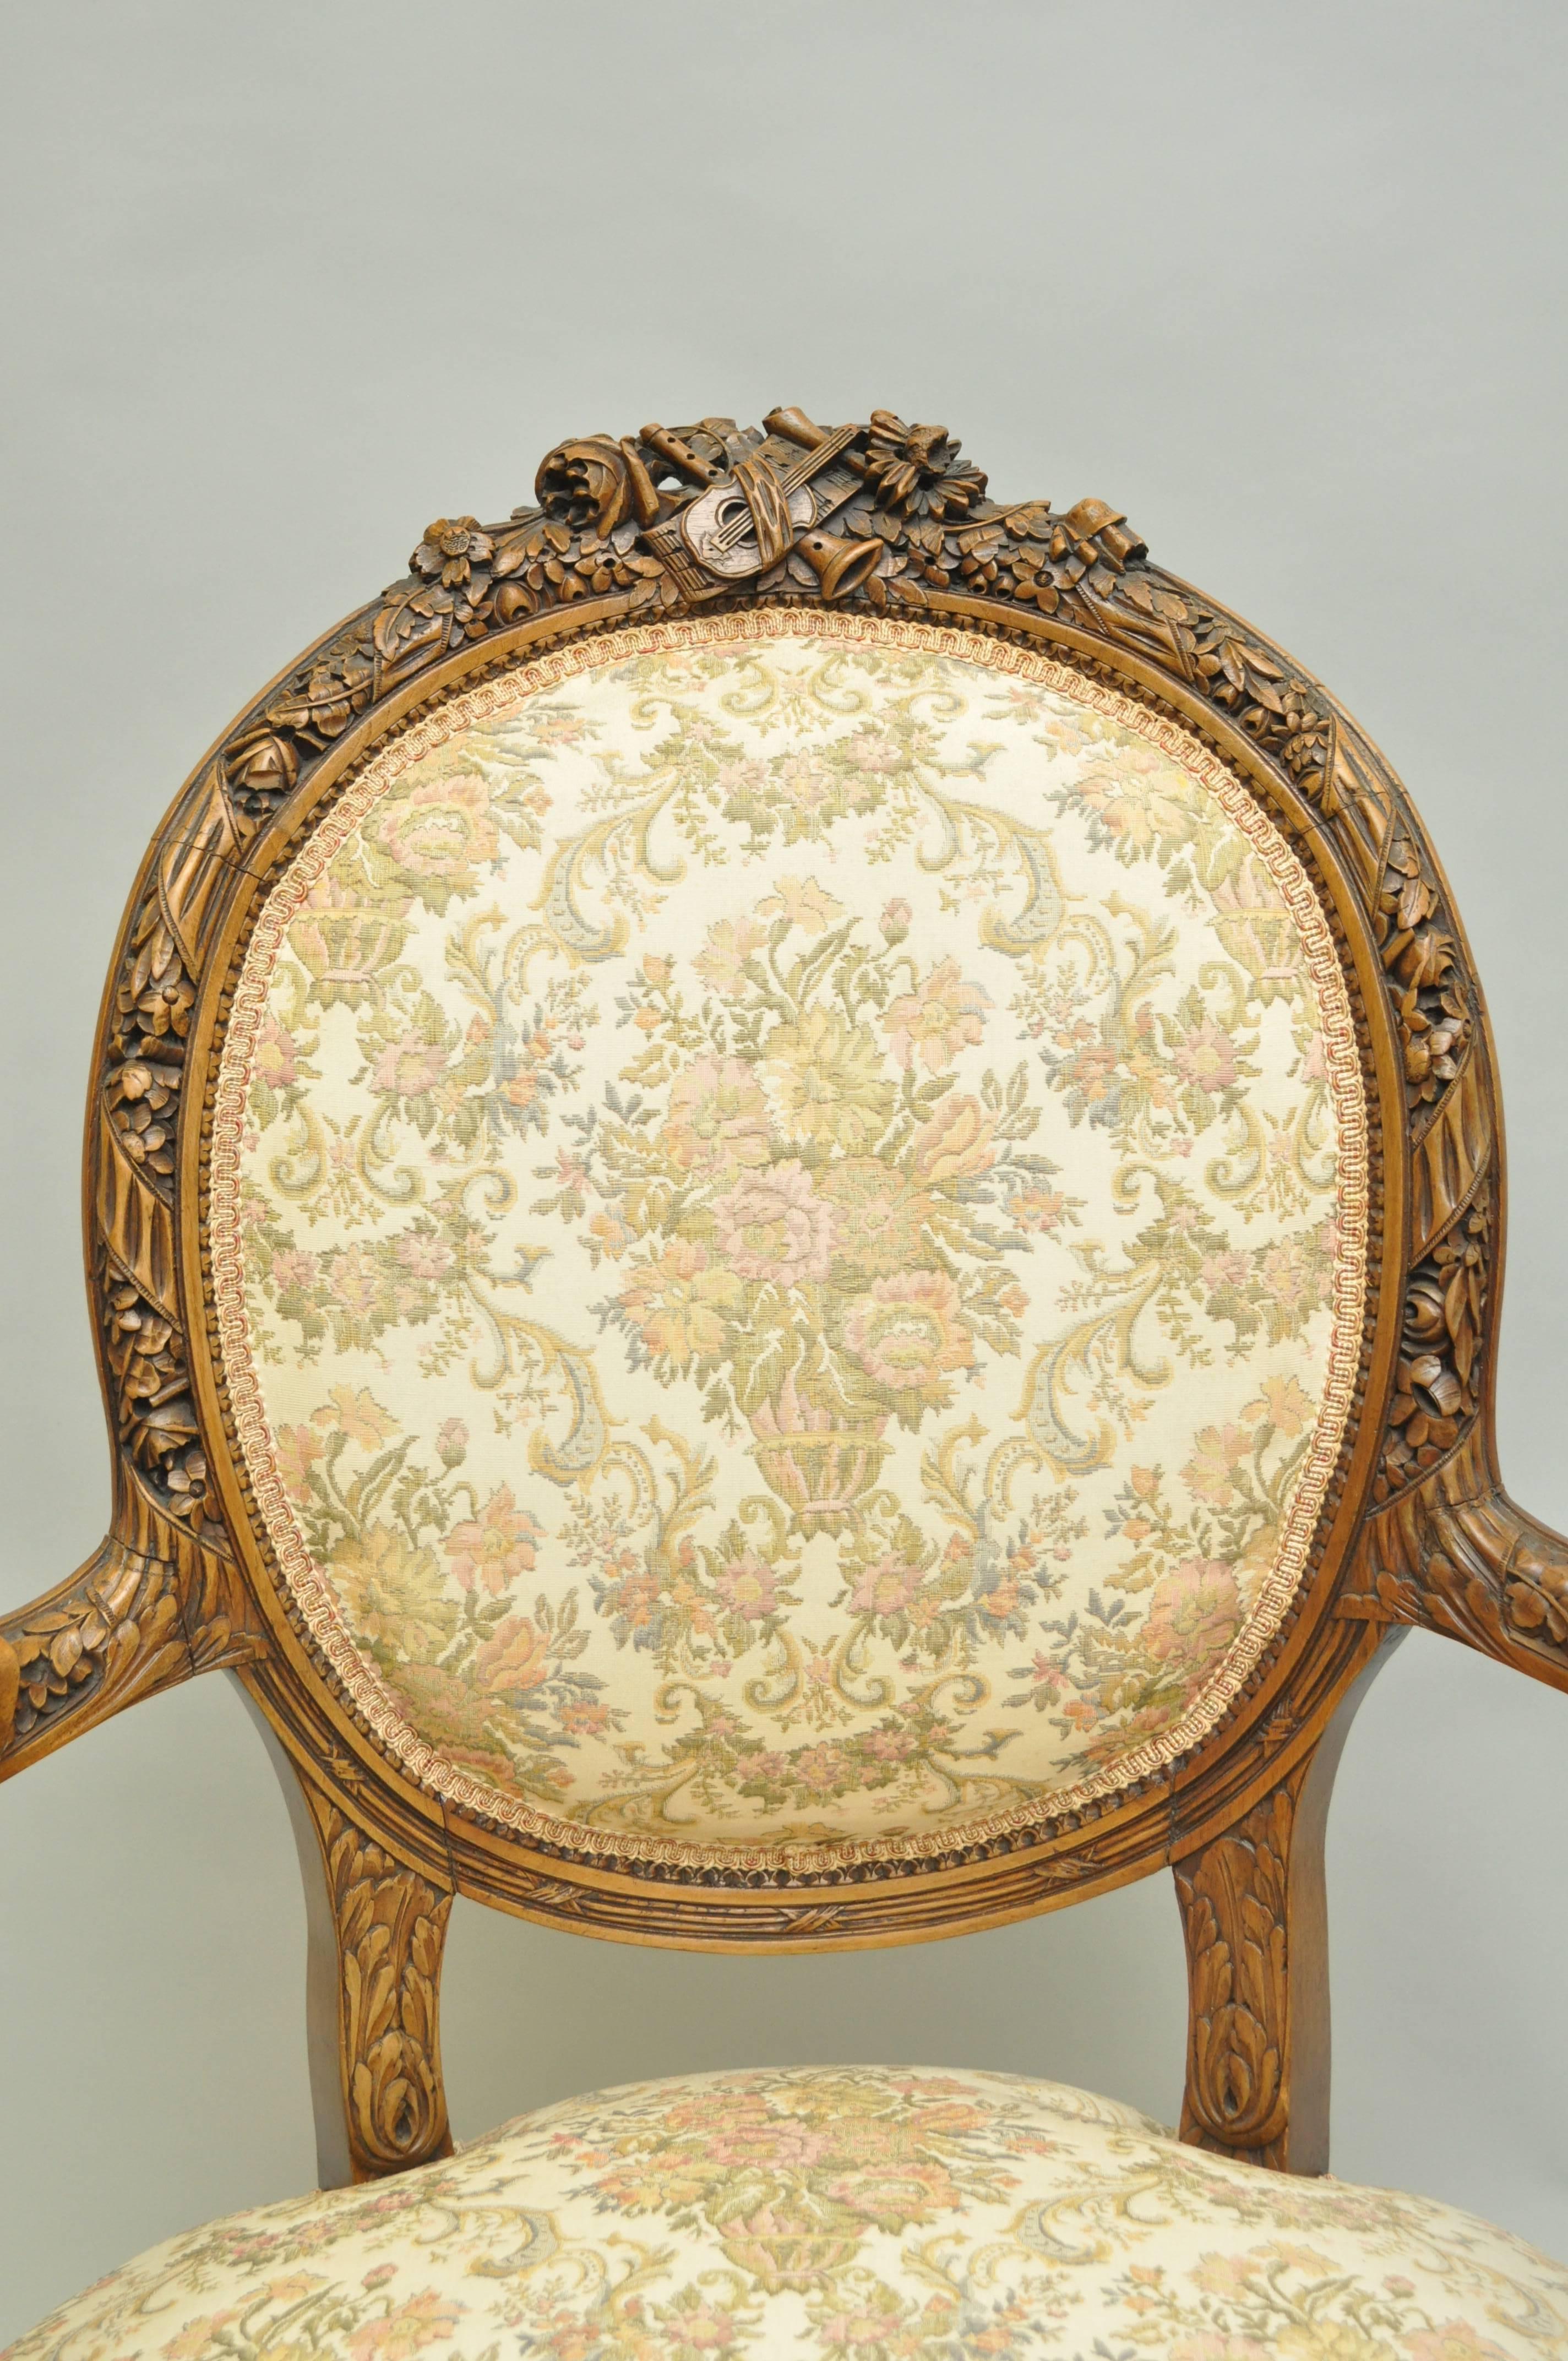 Remarkable early 1900s, French fauteuil in the Louis XVI taste. Item features ornate and fine carvings to the solid walnut frame including musical instruments at the crest. Chair further features a round medallion back, open arms and reeded and